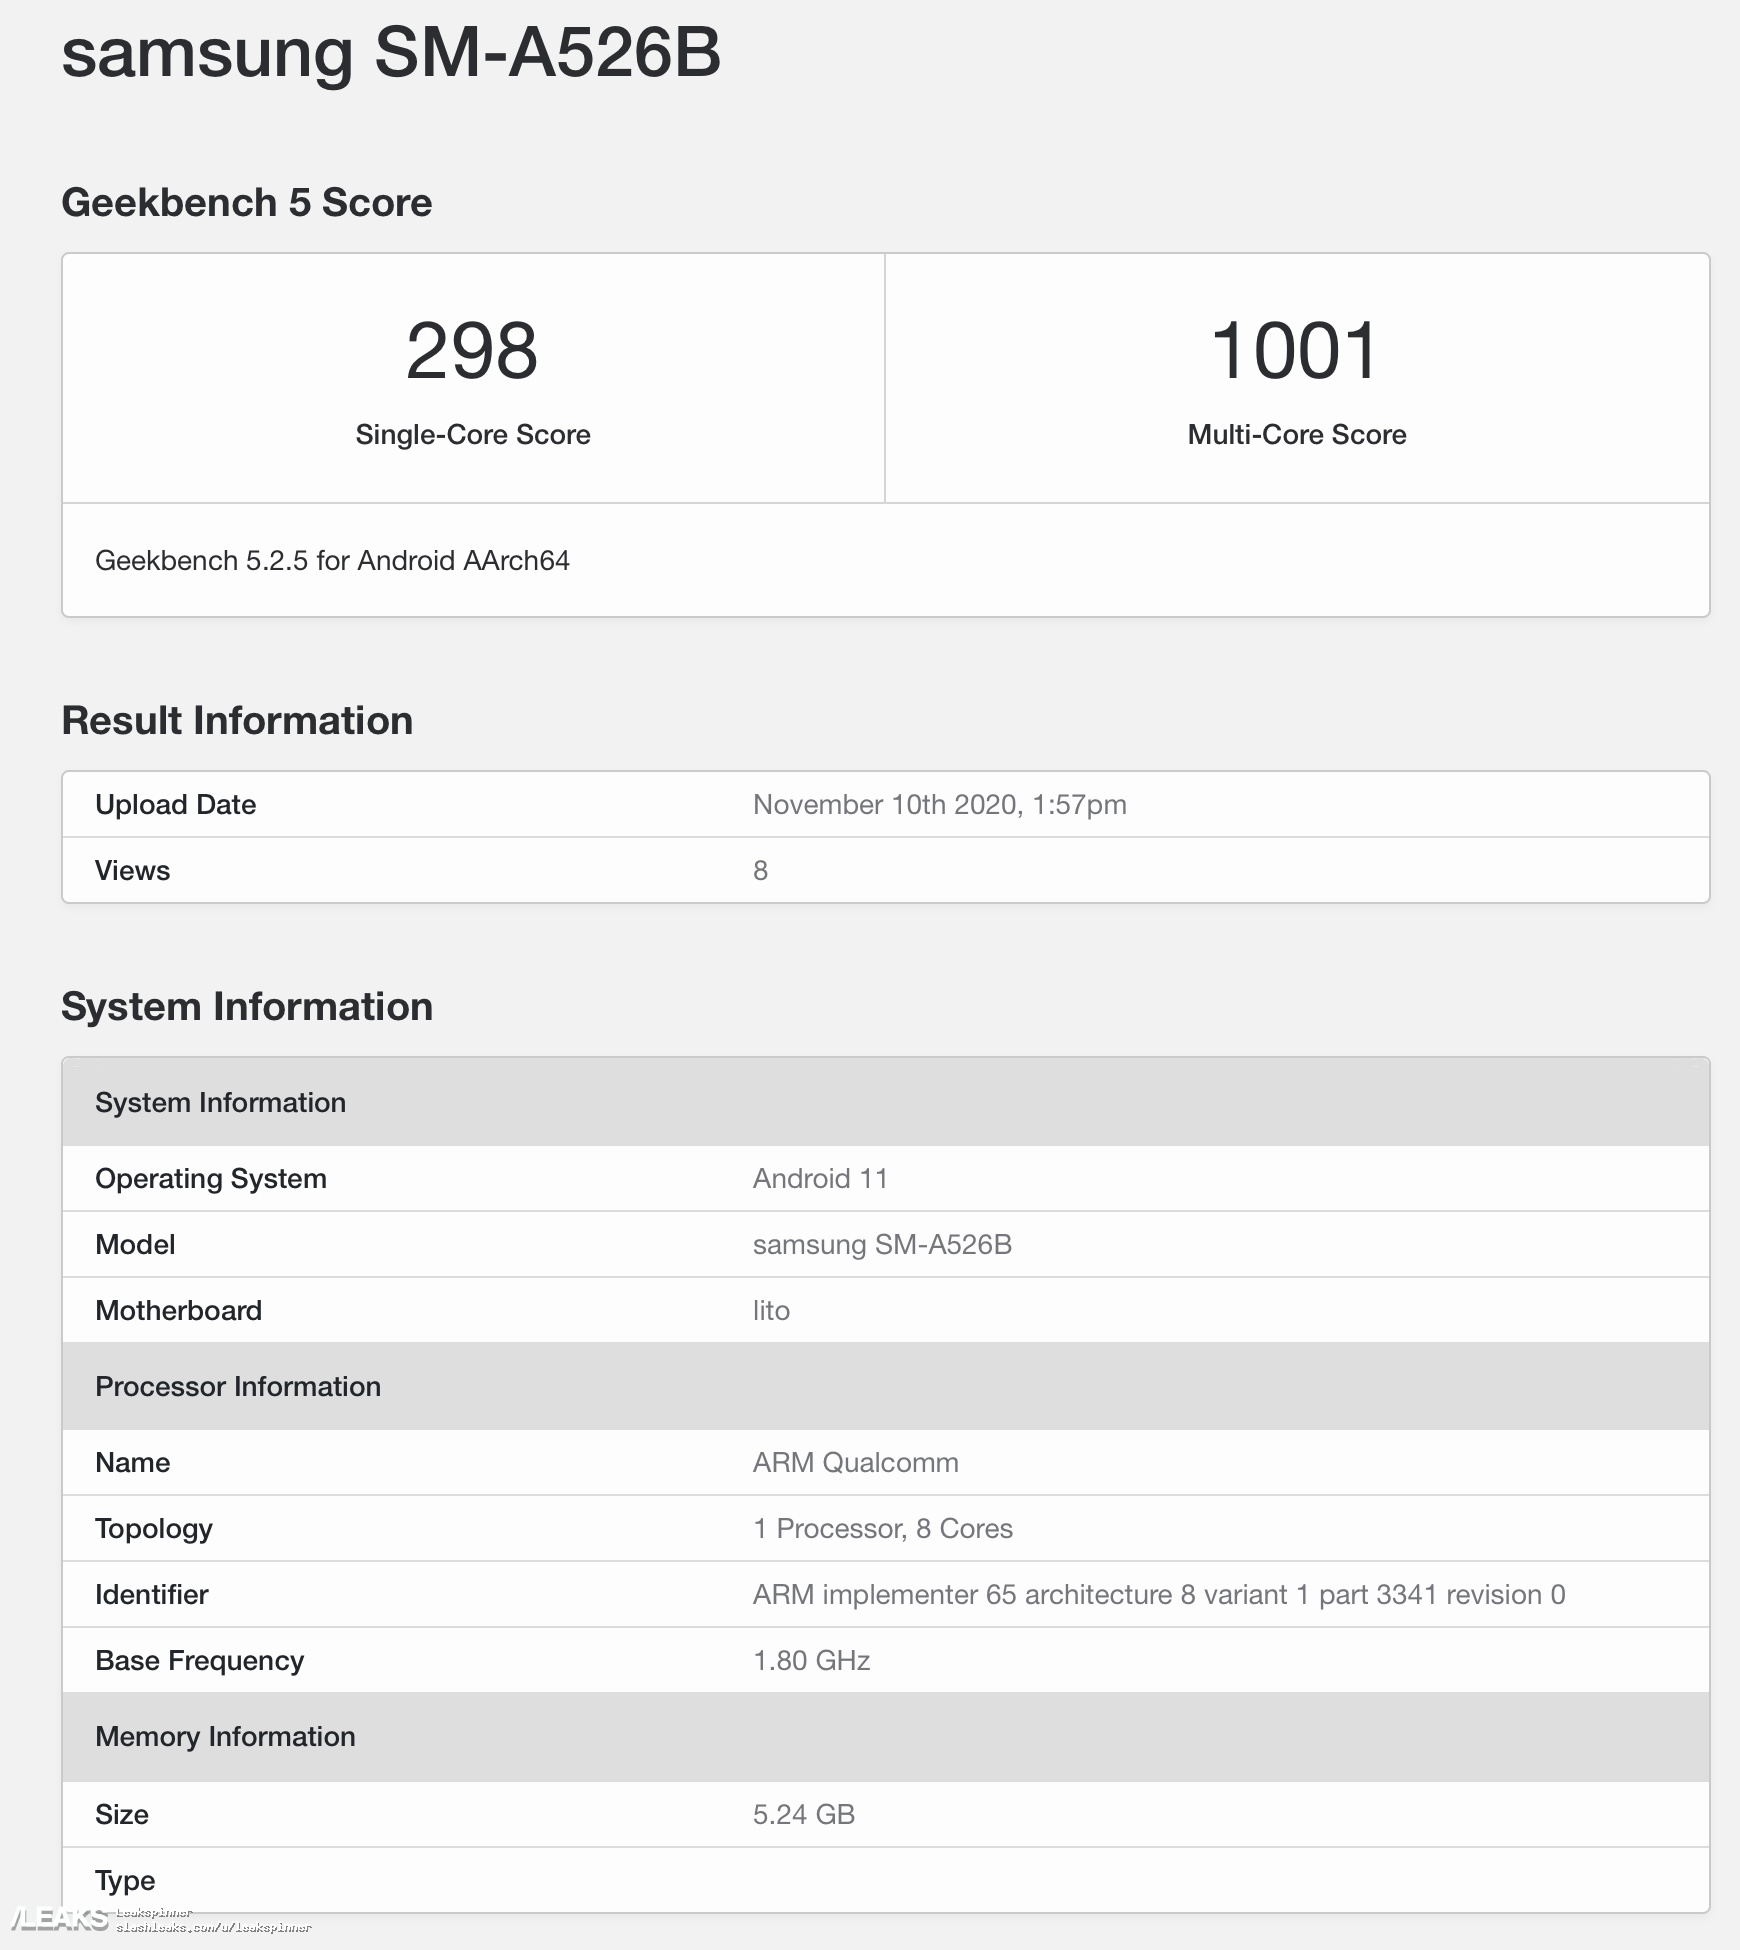 samsung-galaxy-a52-spotted-on-geekbench-with-snapdragon-cpu-and-6gb-ram.png